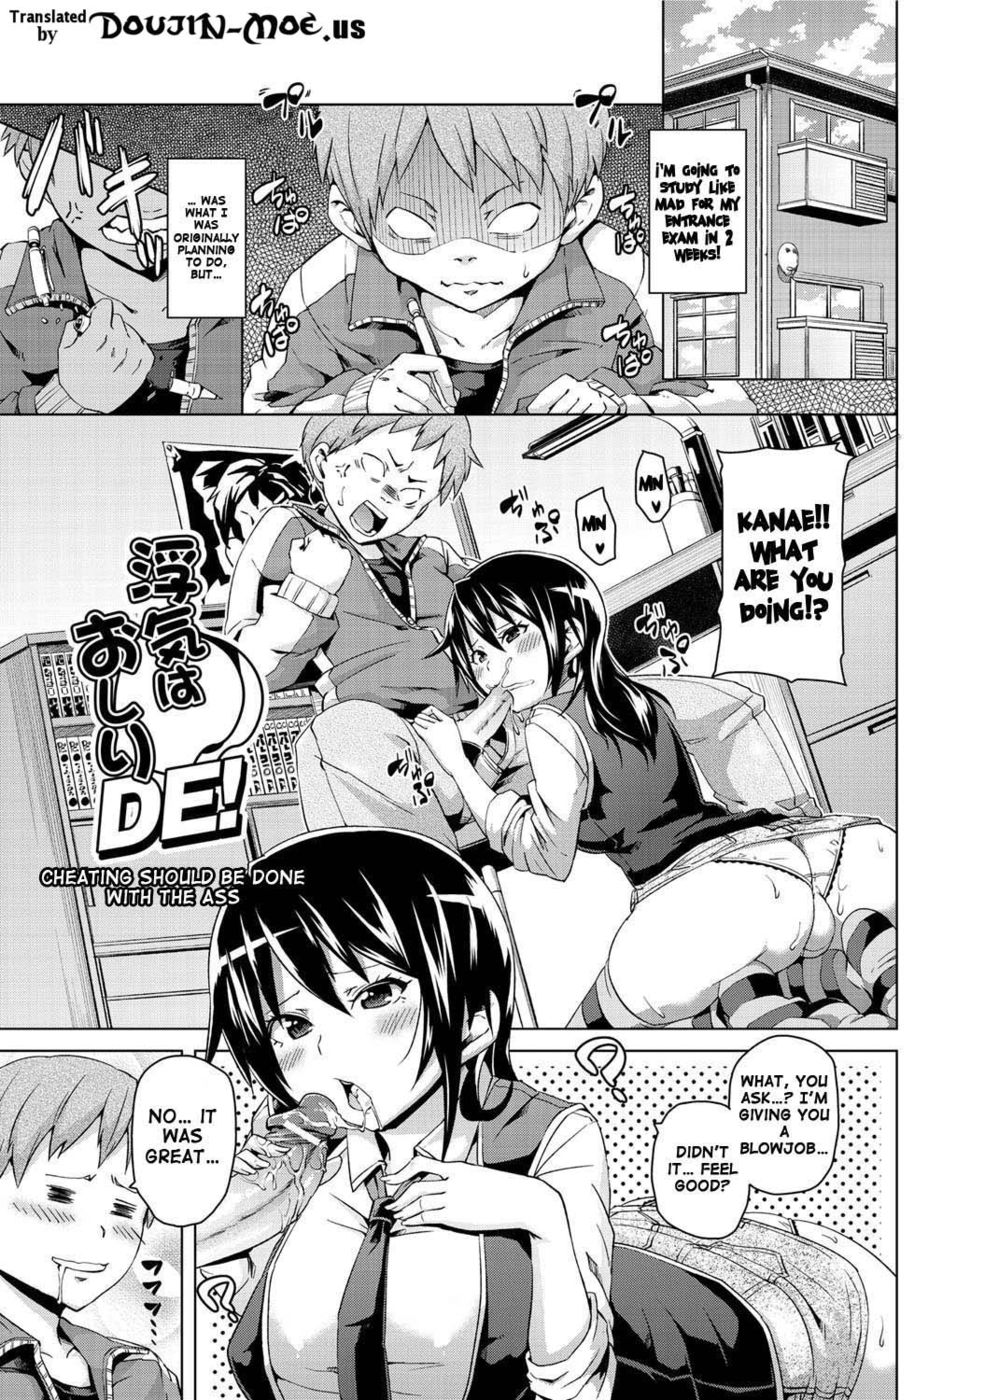 Hentai Manga Comic-Cheating Should Be Done With The Ass-Read-1